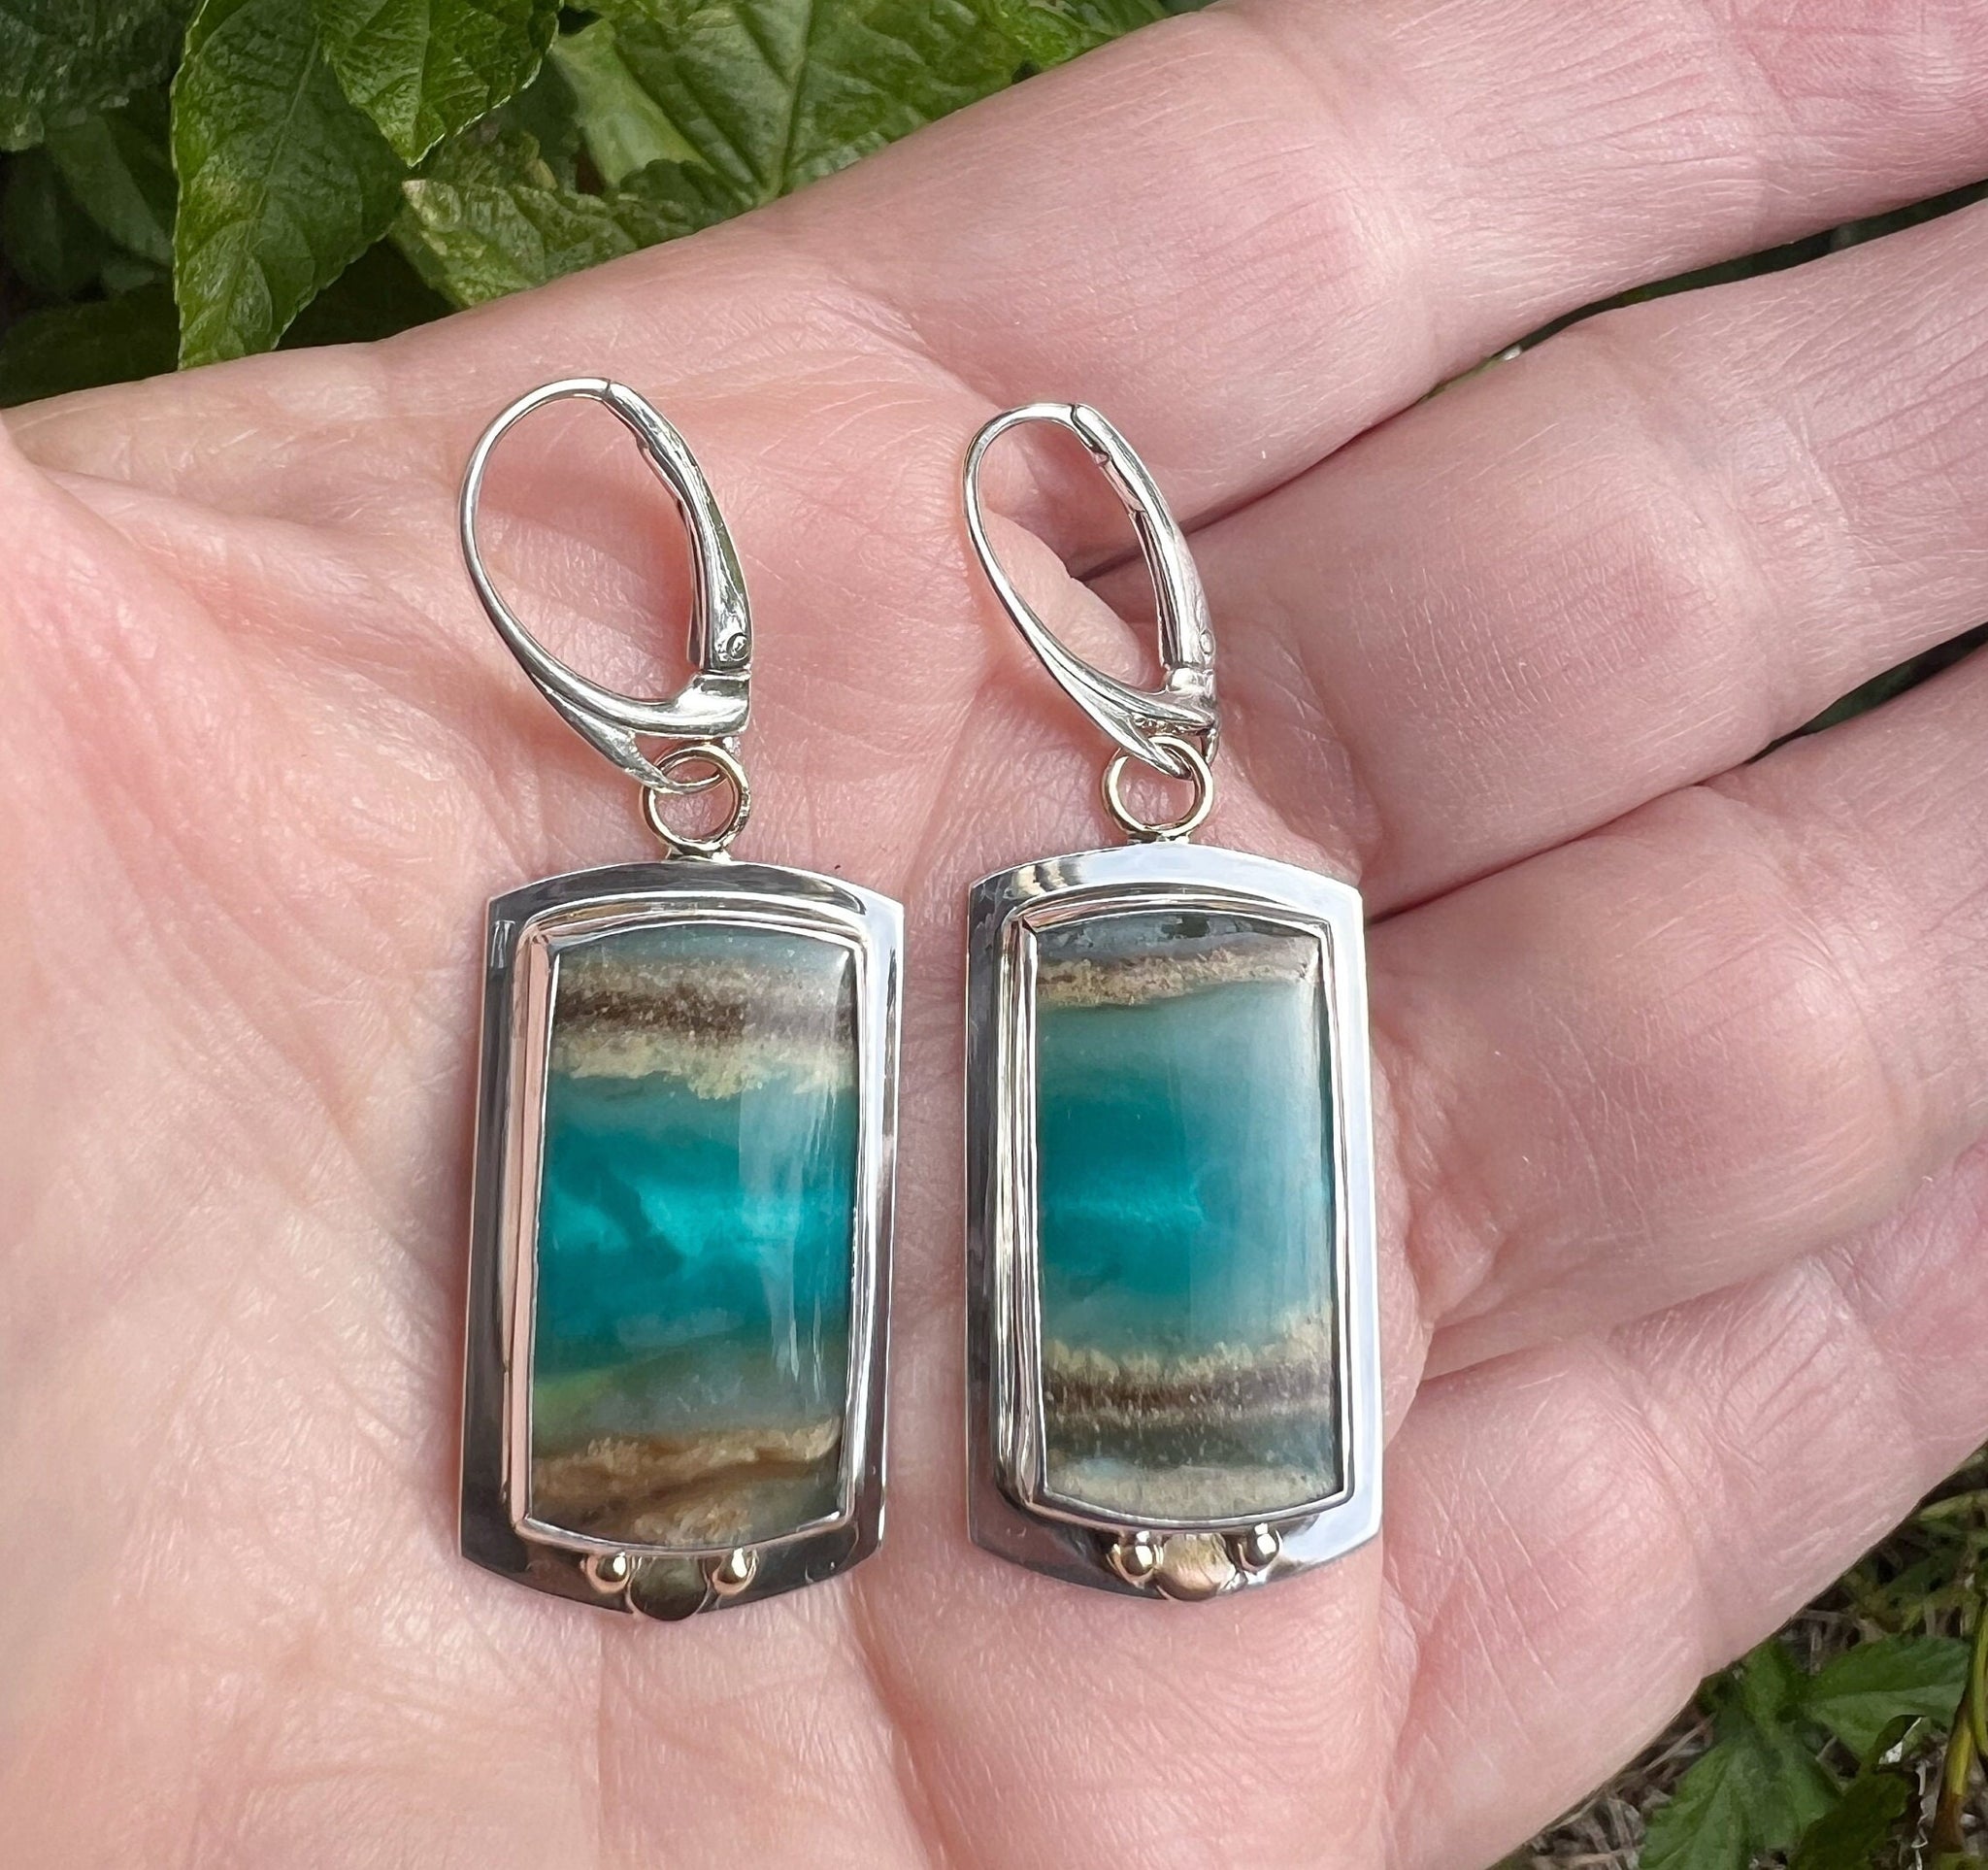 Indonesian Opals In Sterling Silver with 14k Gold Details, Scenic Stone Earrings